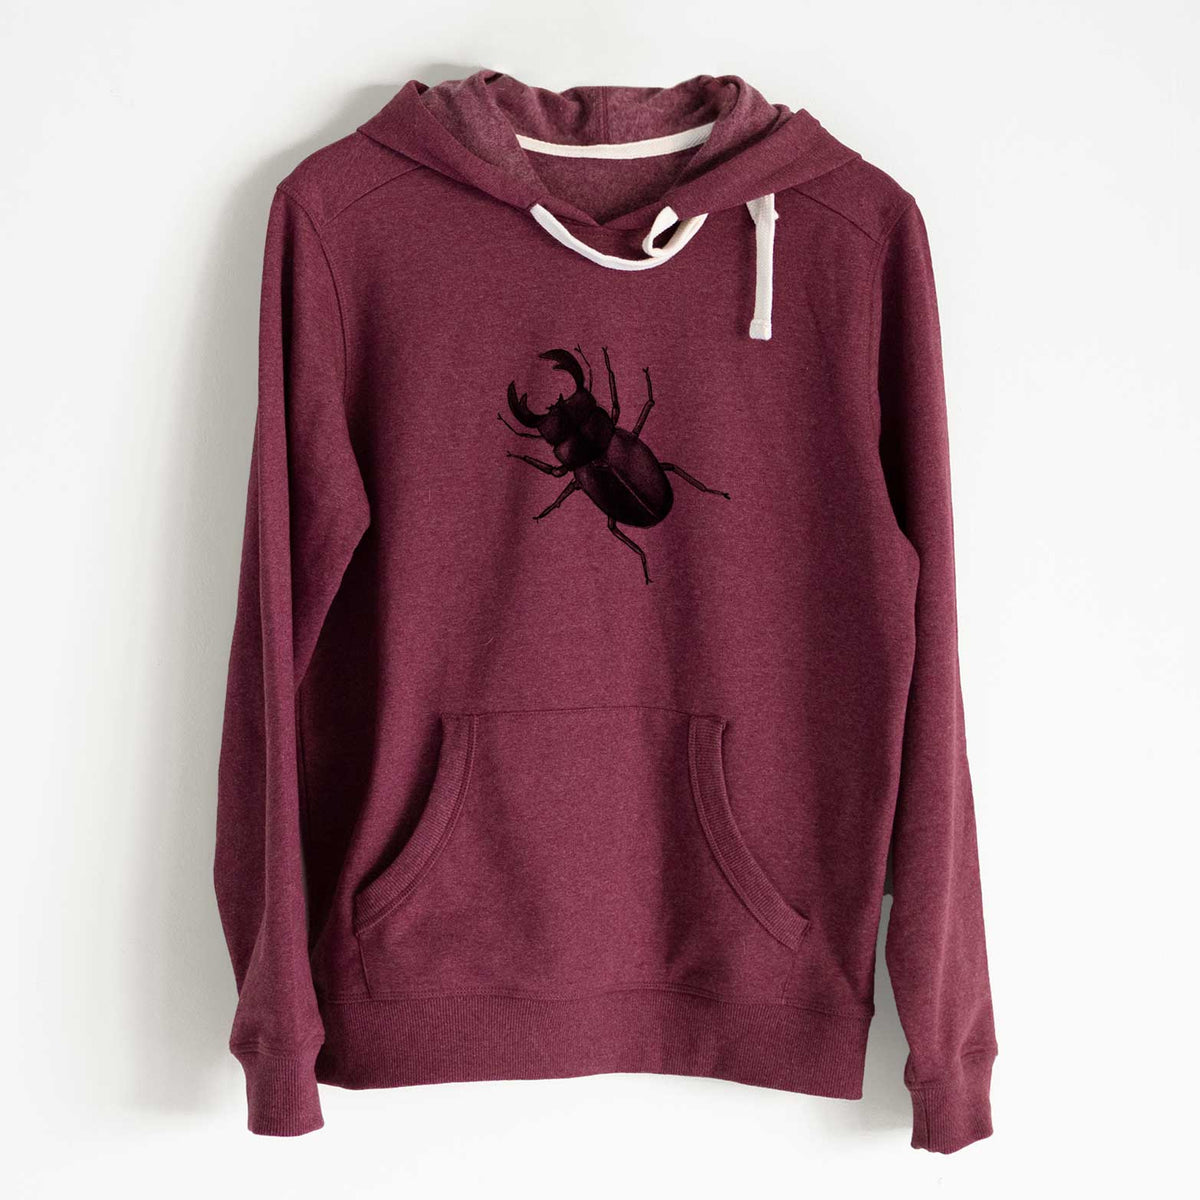 Dorcus titanus - Giant Stag Beetle - Unisex Recycled Hoodie - CLOSEOUT - FINAL SALE